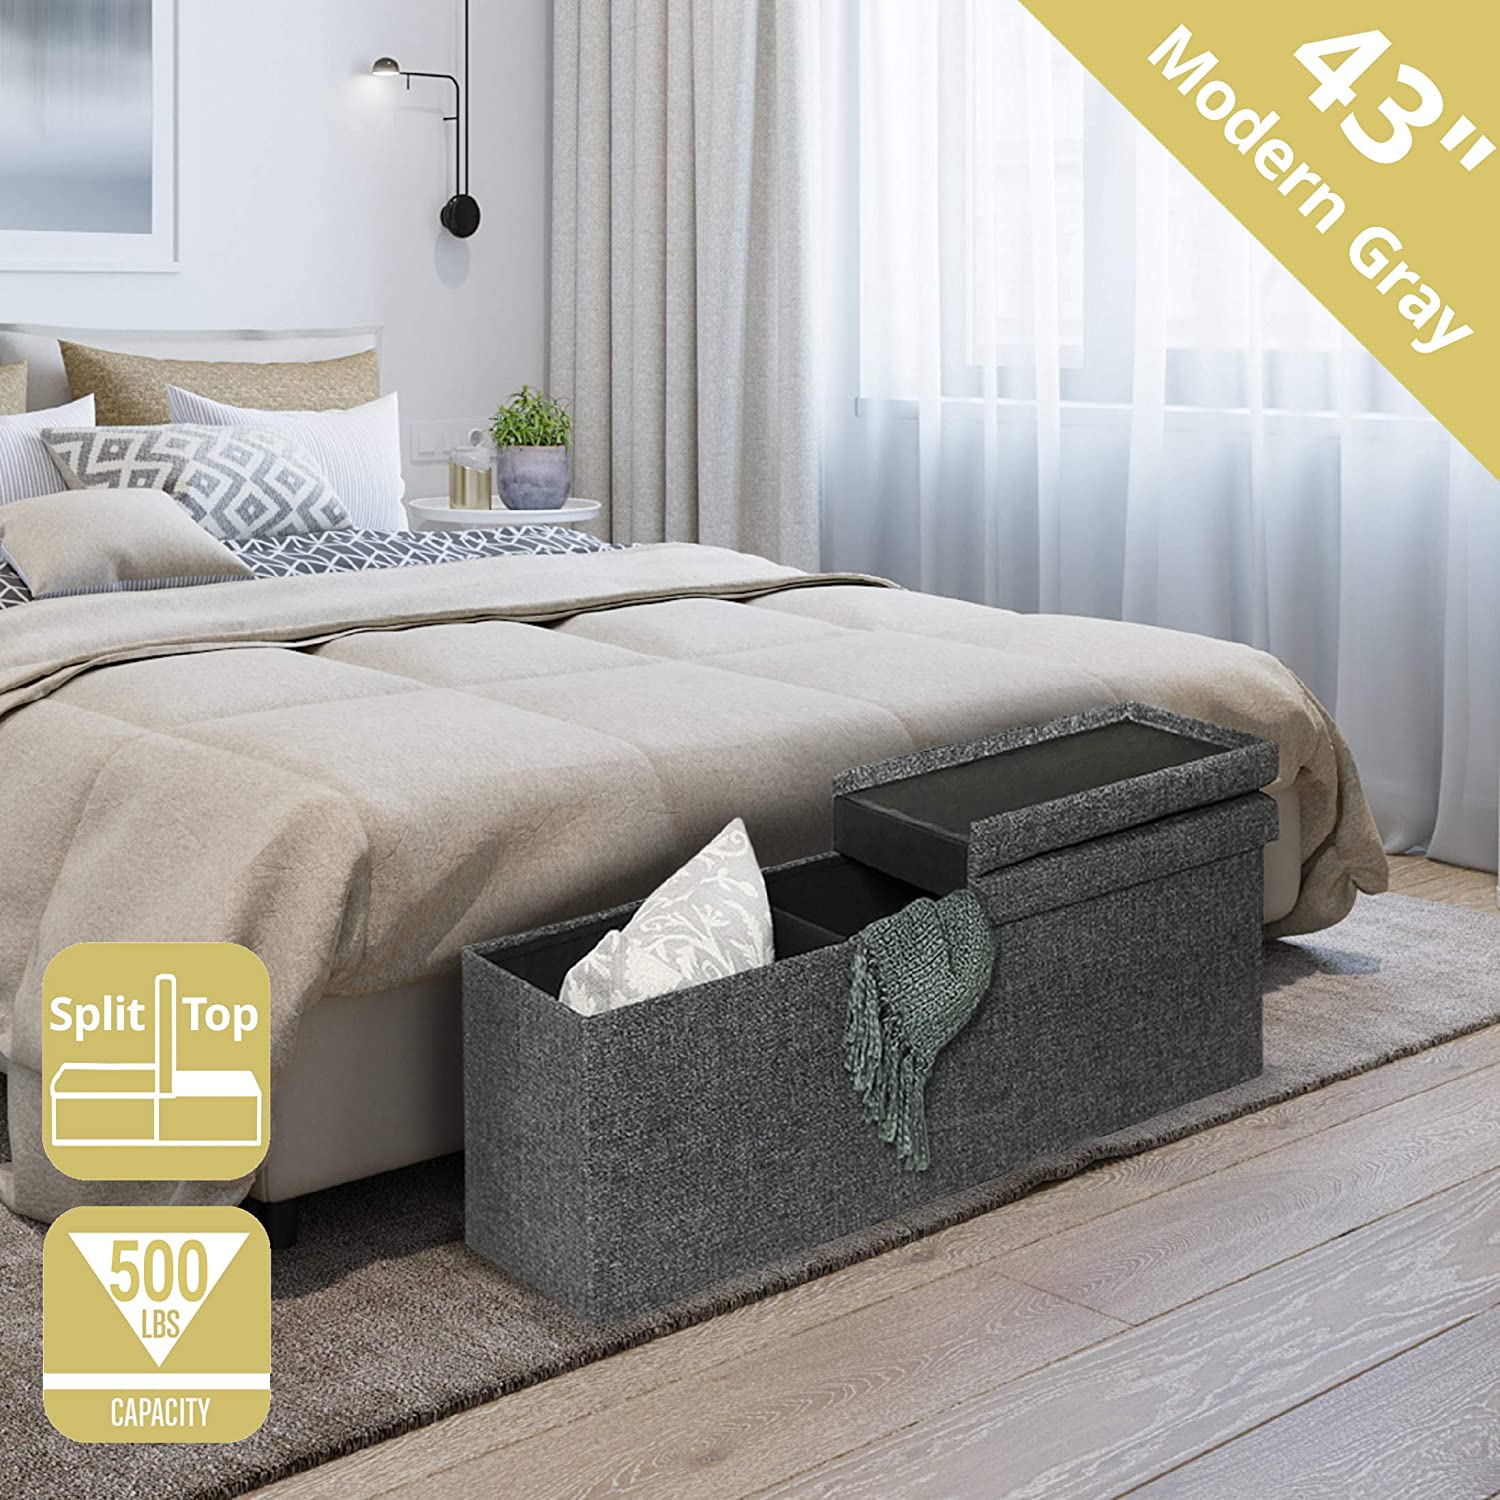 Seville Classics Tufted Foldable Storage Bed Ottoman